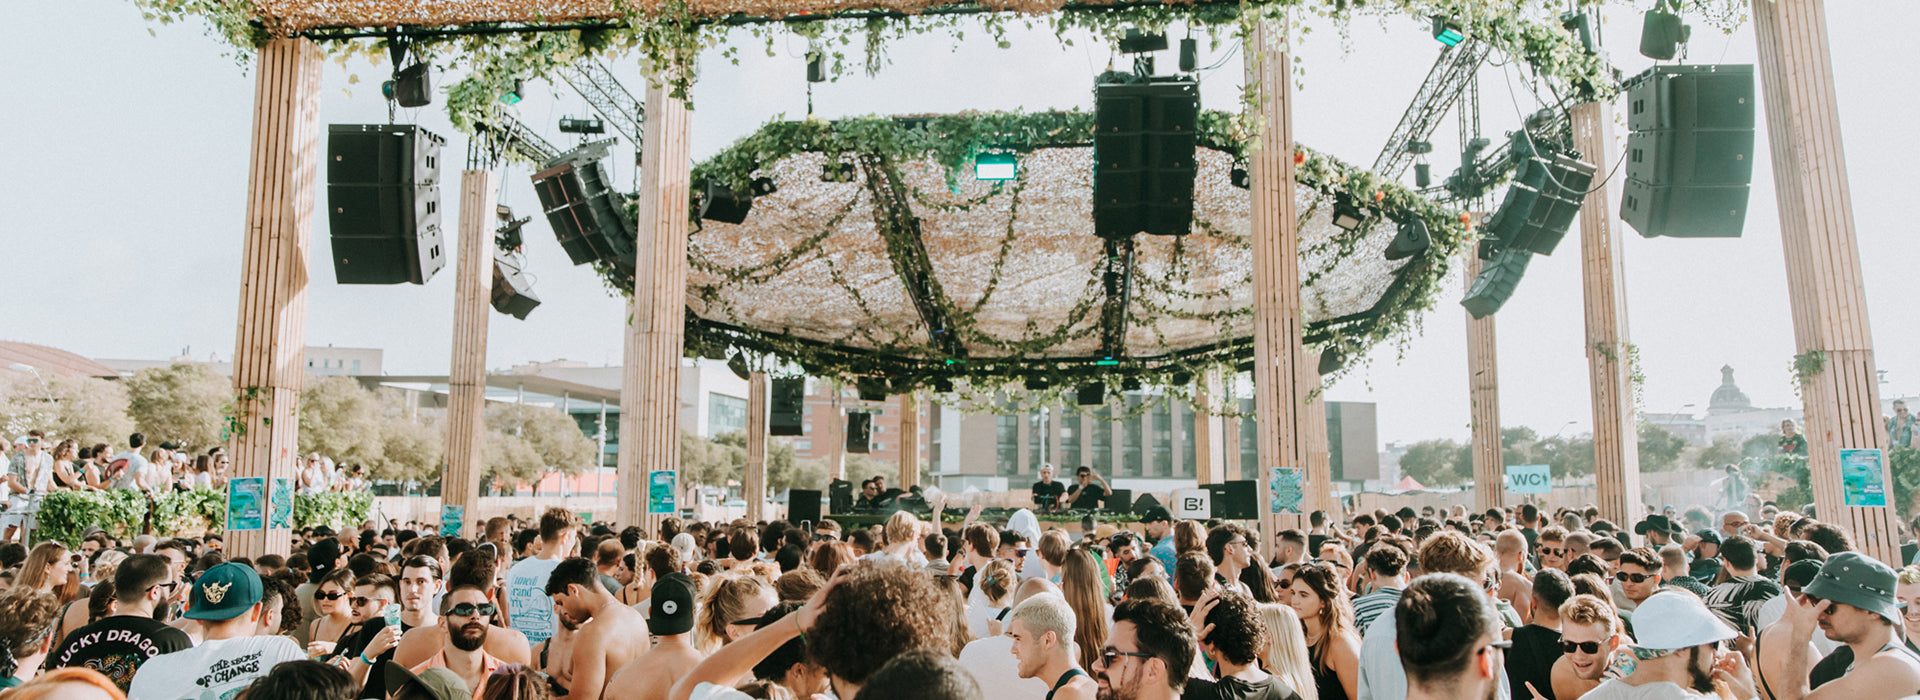 Brunch Electronik Announces Lineup For Debut USA Editions in Partnership with Minimal Effort and SBCLTR